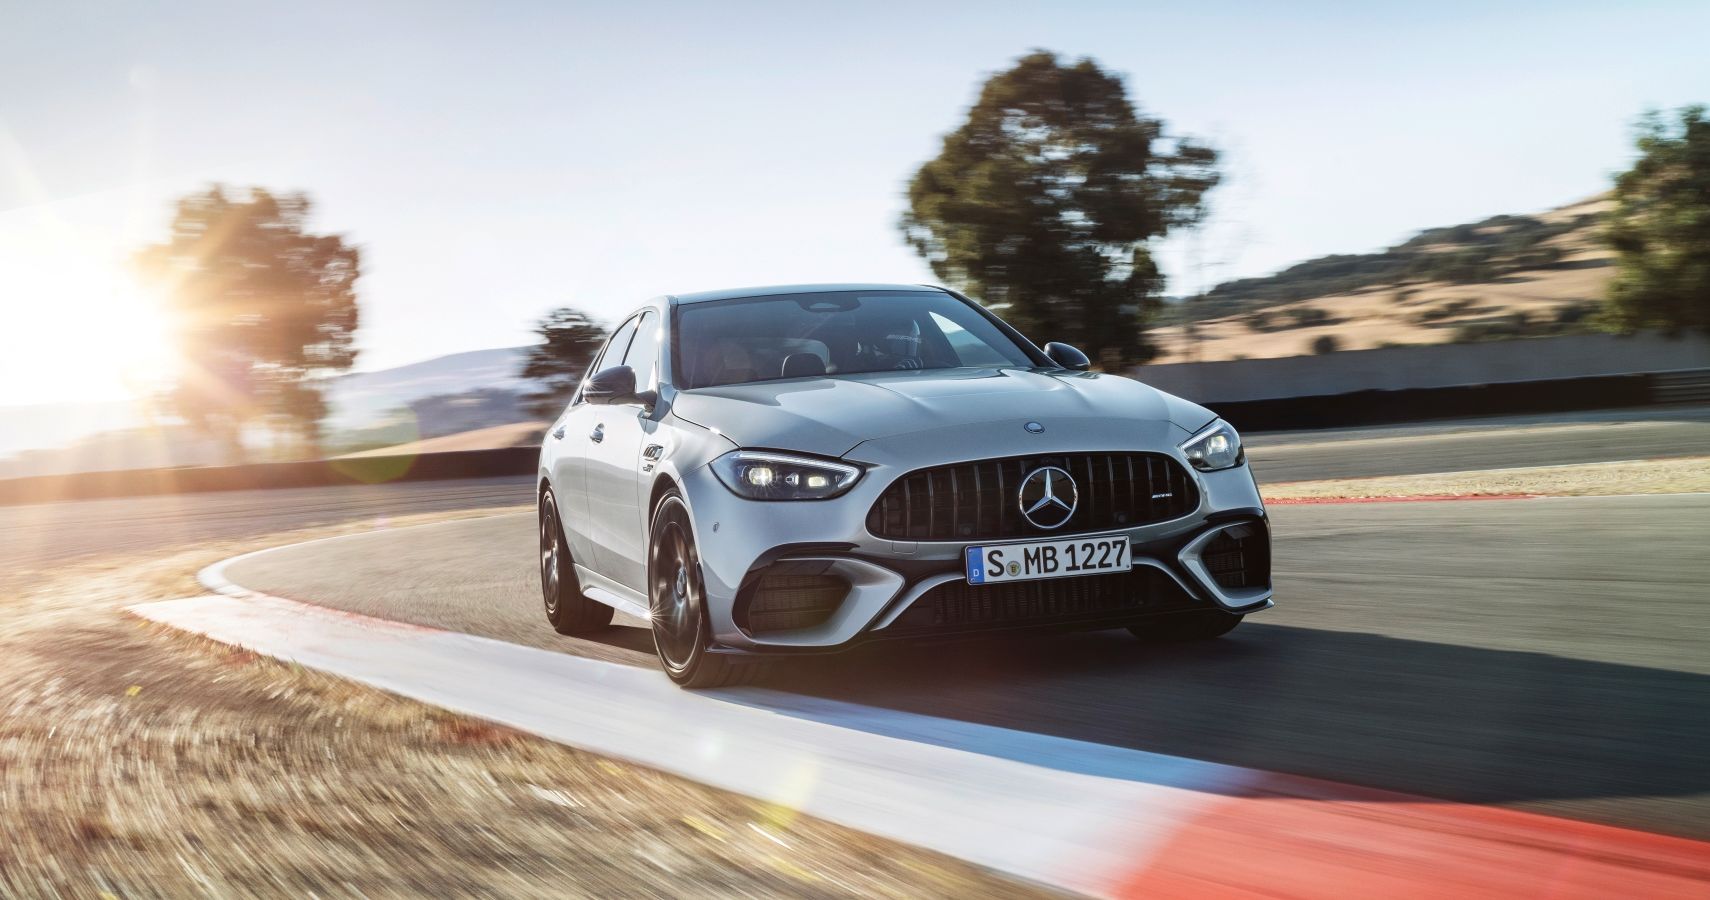 Mercedes-Benz - News, reviews, picture galleries and videos - The Car Guide